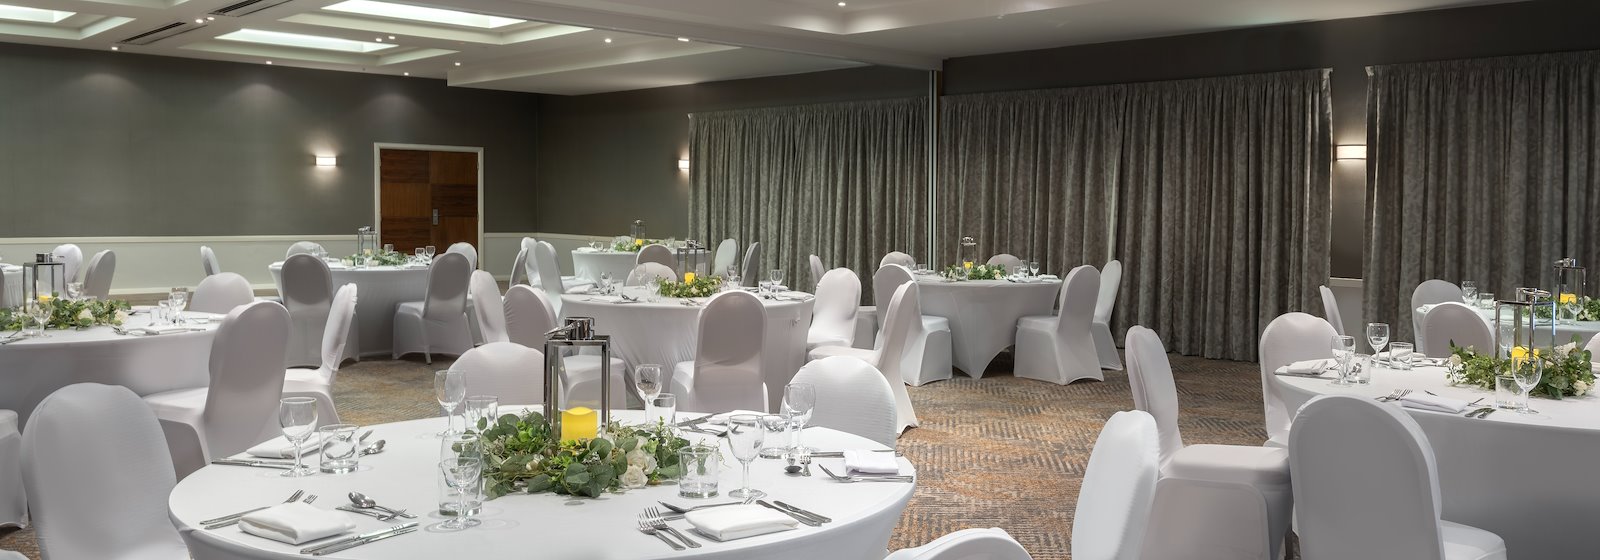 wedding party function rooms peterborough